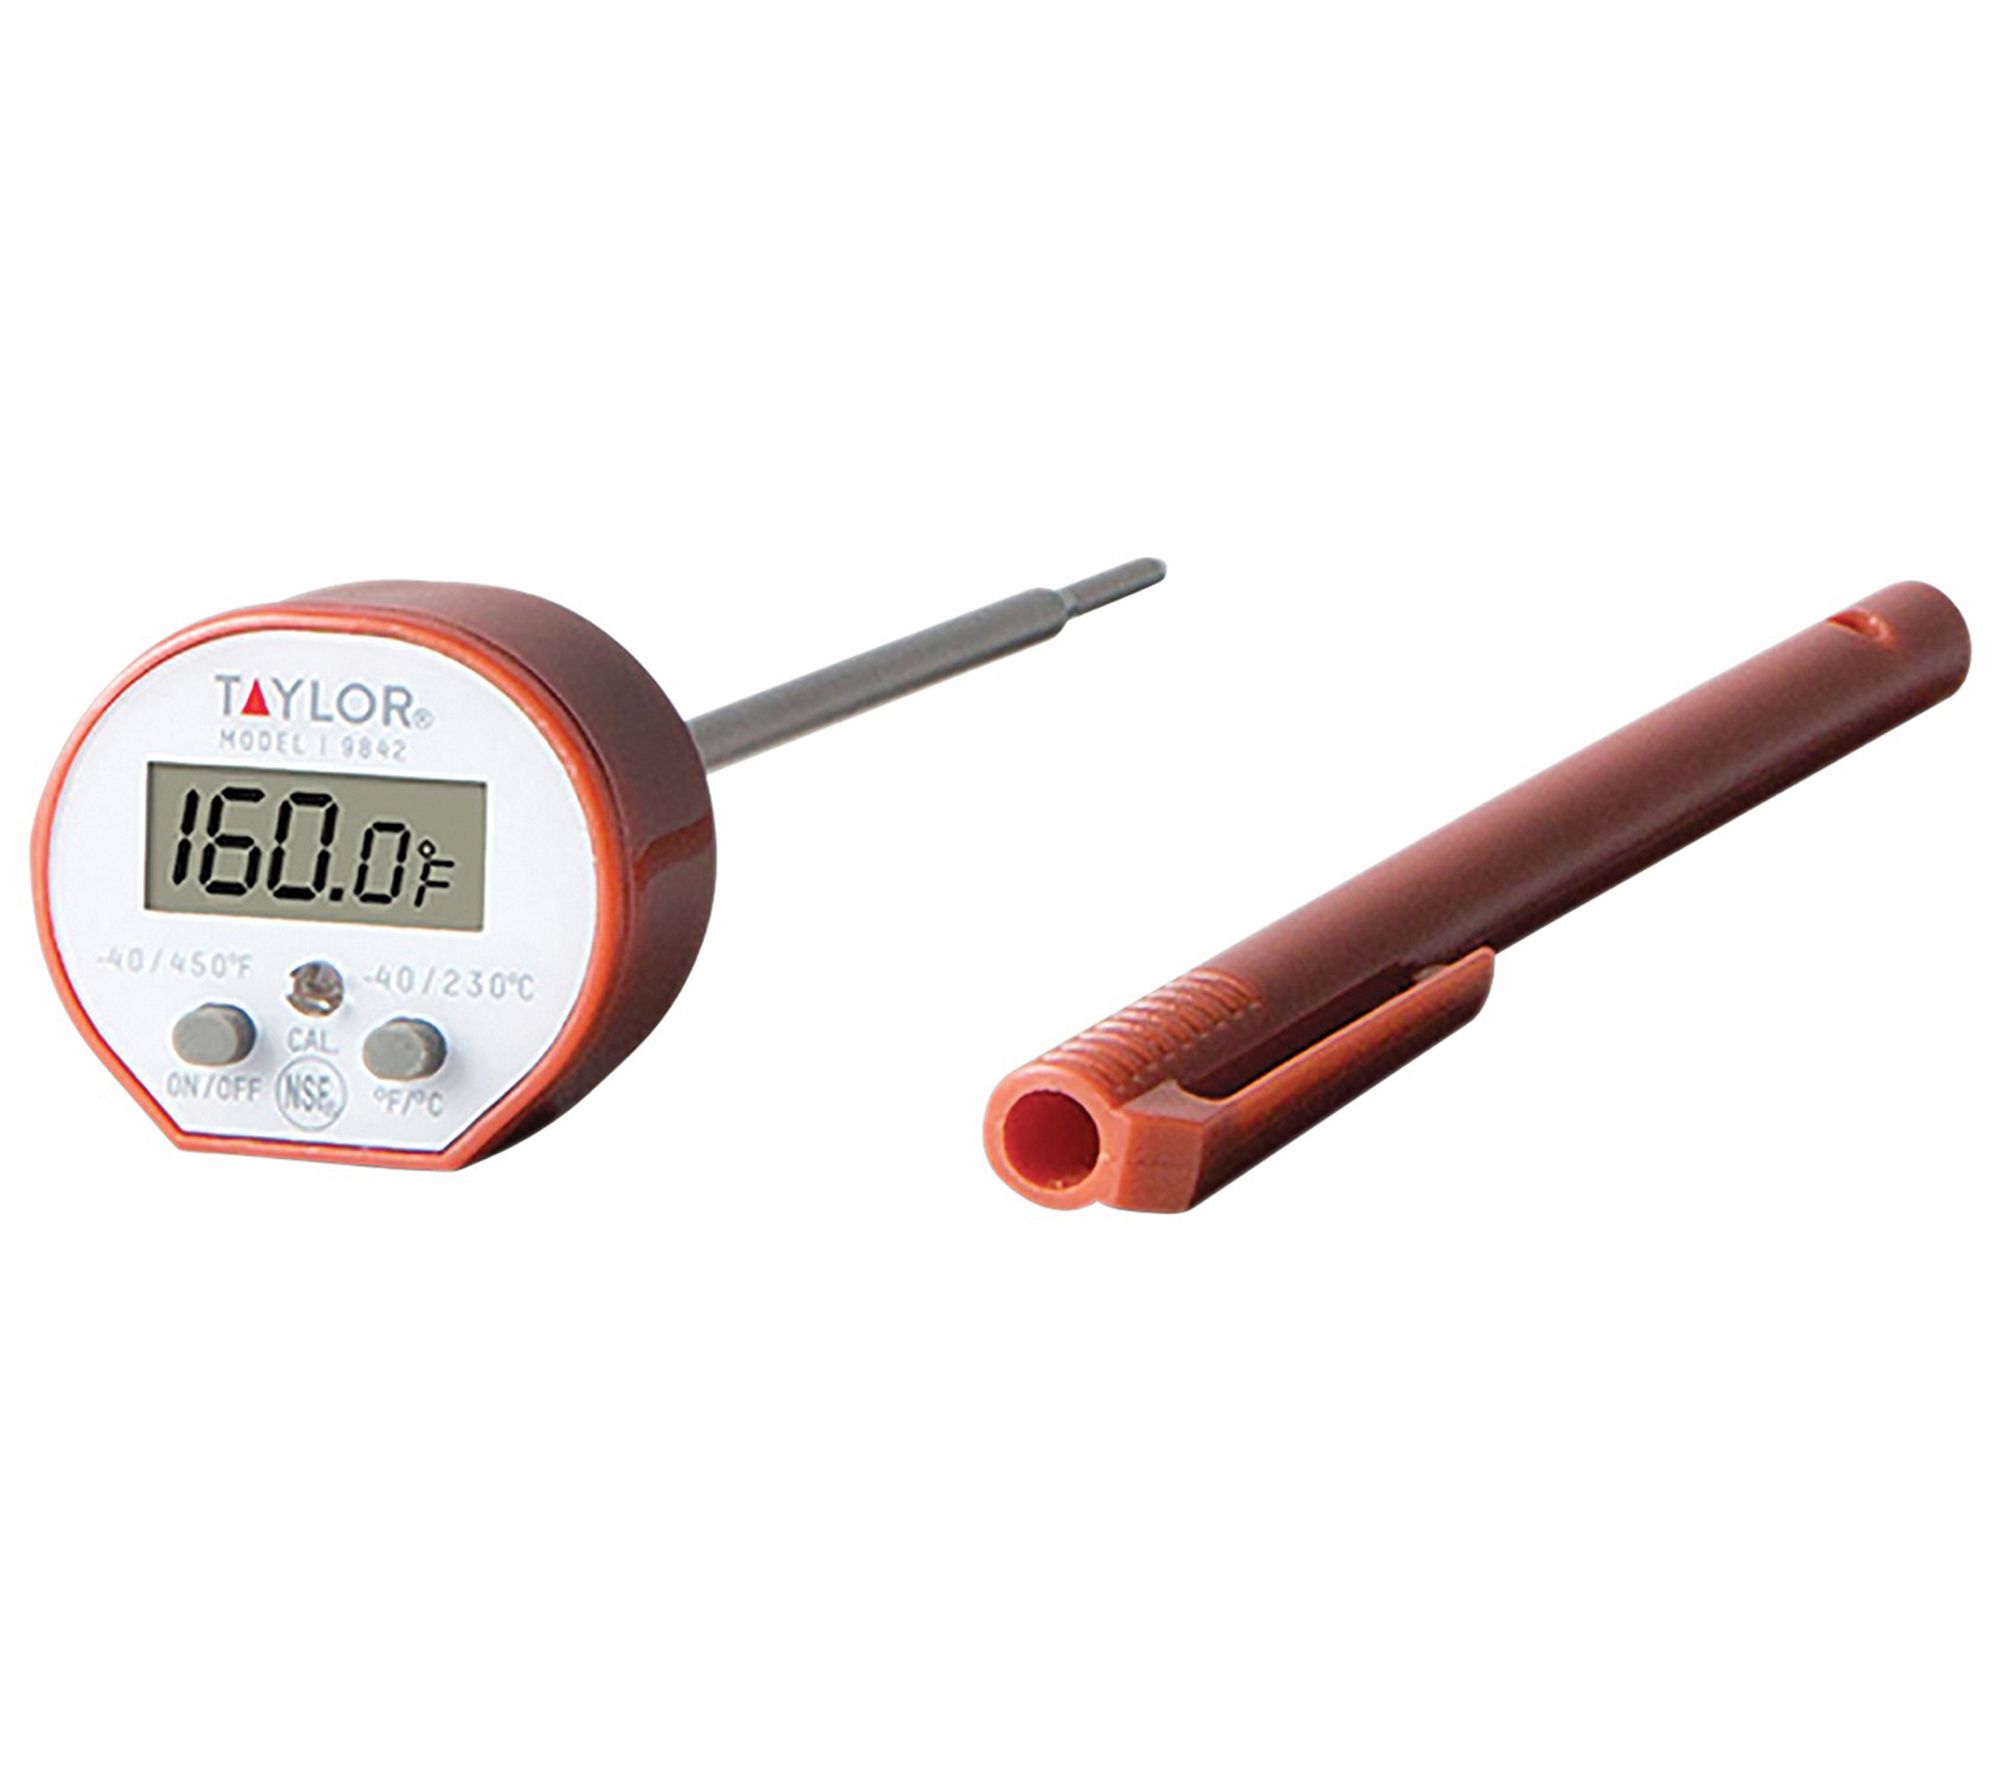 Taylor Digital Cooking Probe Thermometer & Timer -Tested - with original  package